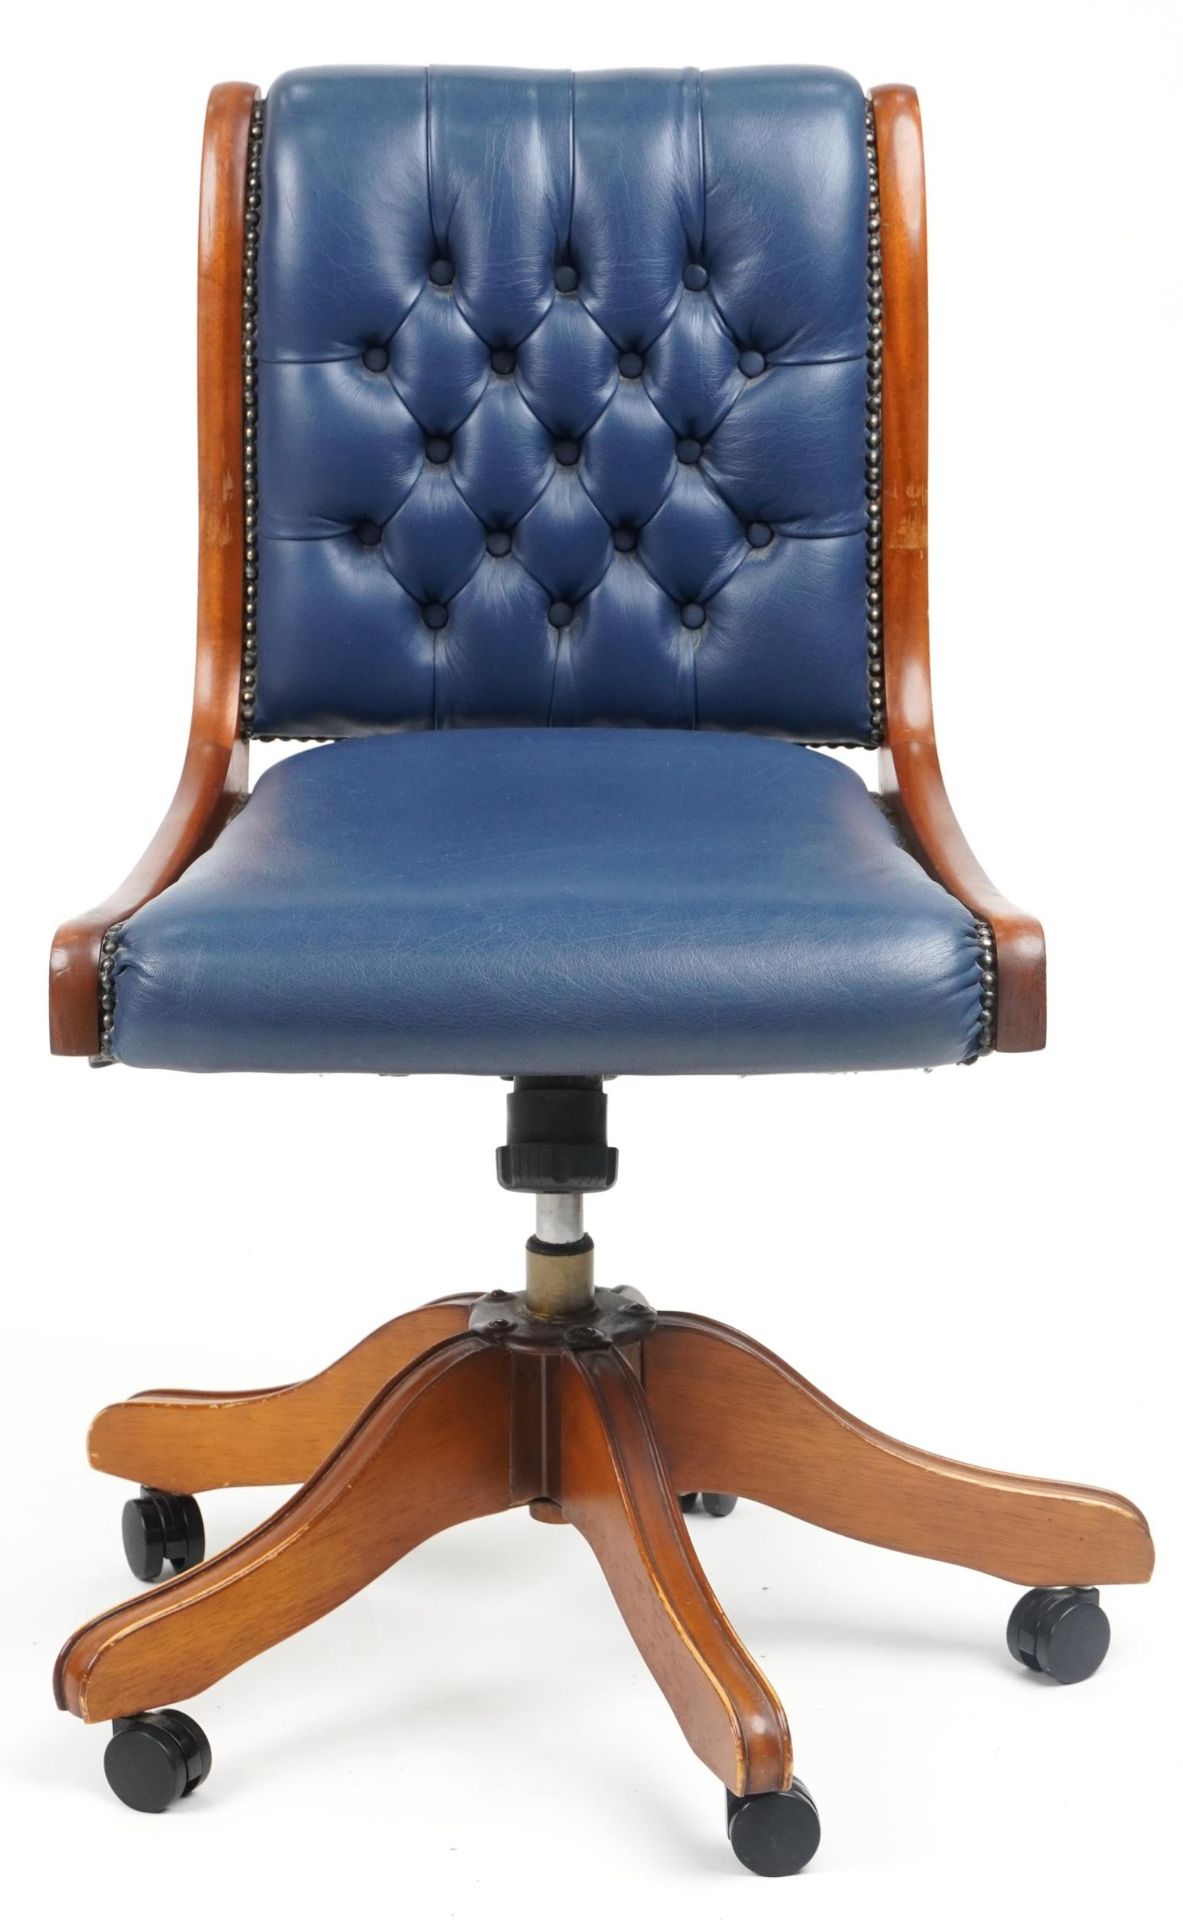 Mahogany and blue leather button back upholstered adjustable desk chair, 89cm high - Image 2 of 4